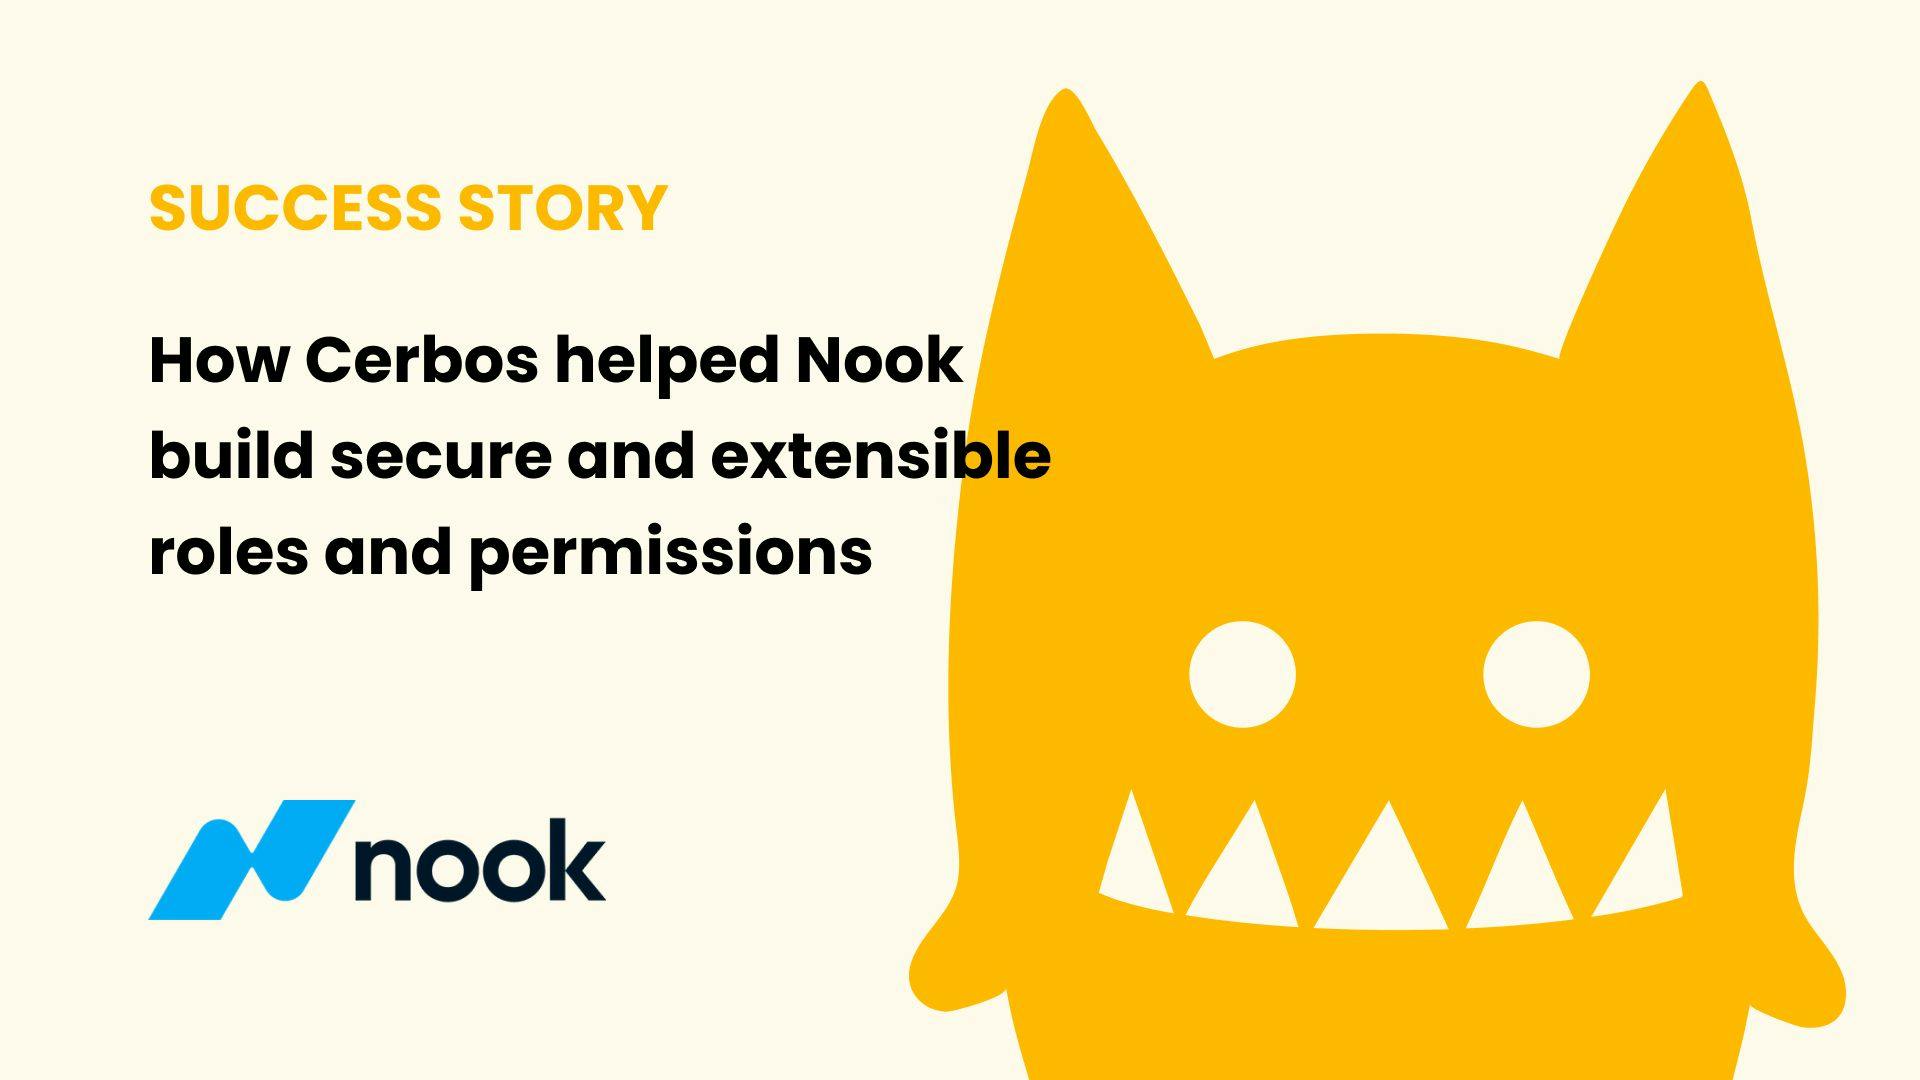 How Cerbos helped Nook build secure and extensible roles and permissions